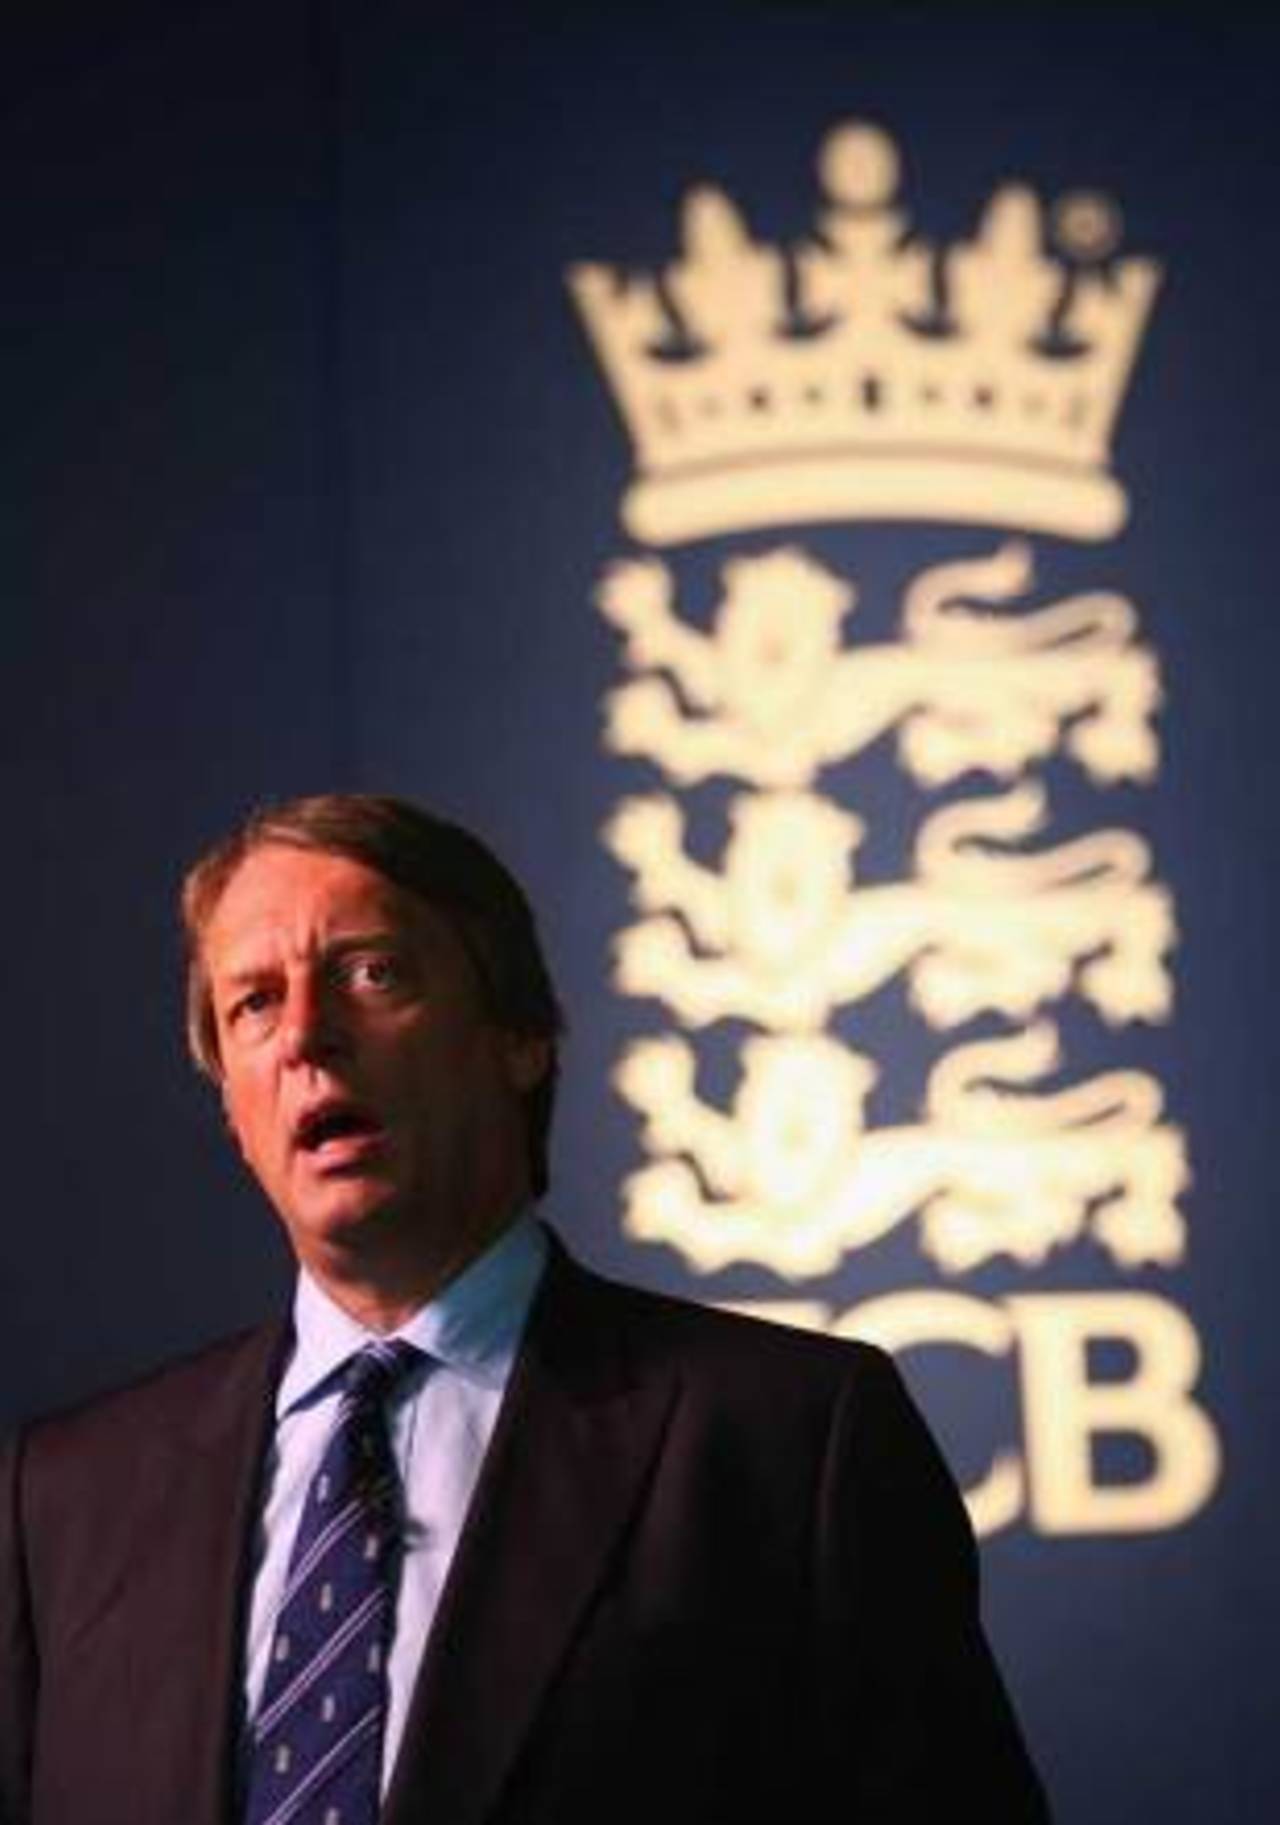 Giles Clarke, along with N Srinivasan, is likely to be one of the front-runners for the post of ICC chairman&nbsp;&nbsp;&bull;&nbsp;&nbsp;Getty Images